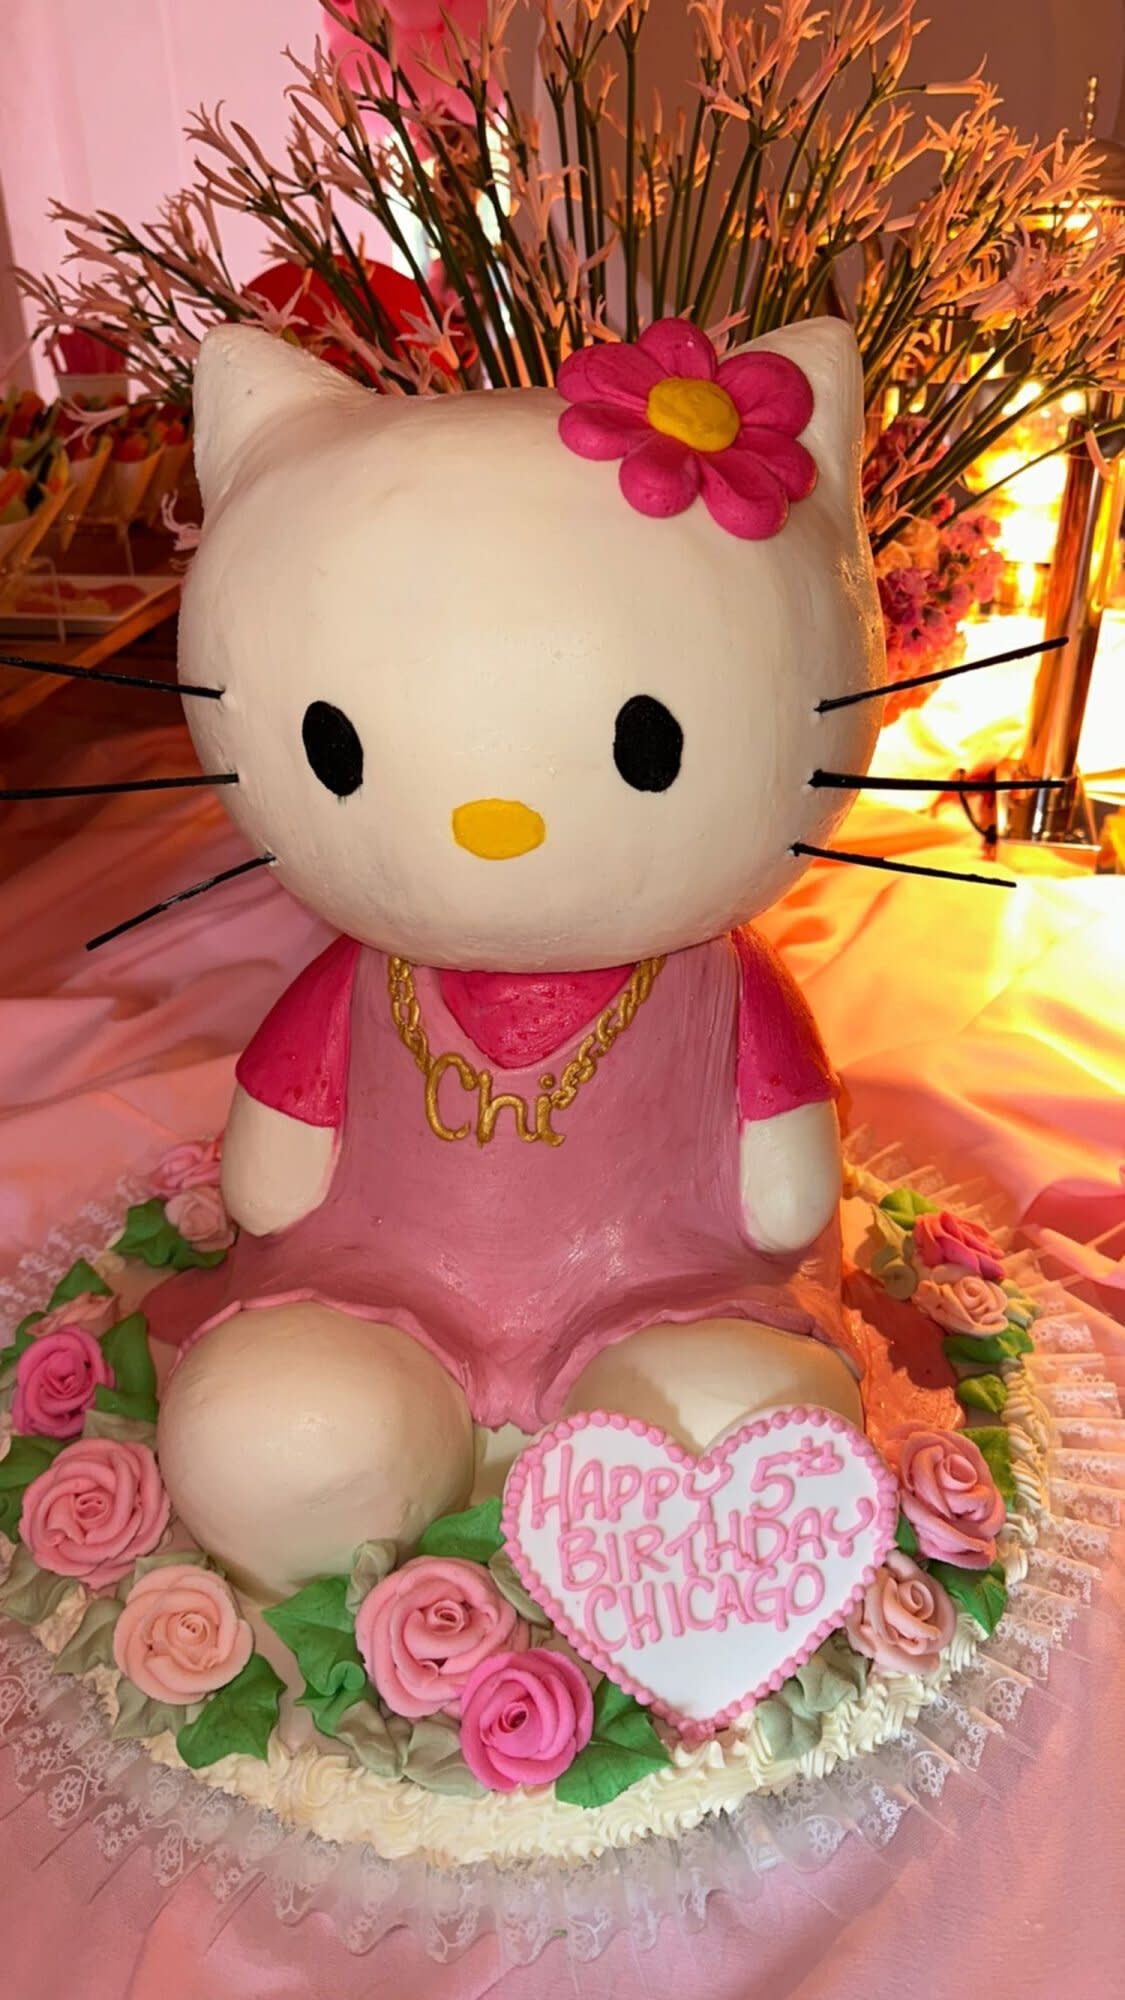 Chicago's Hello Kitty-themed birthday party